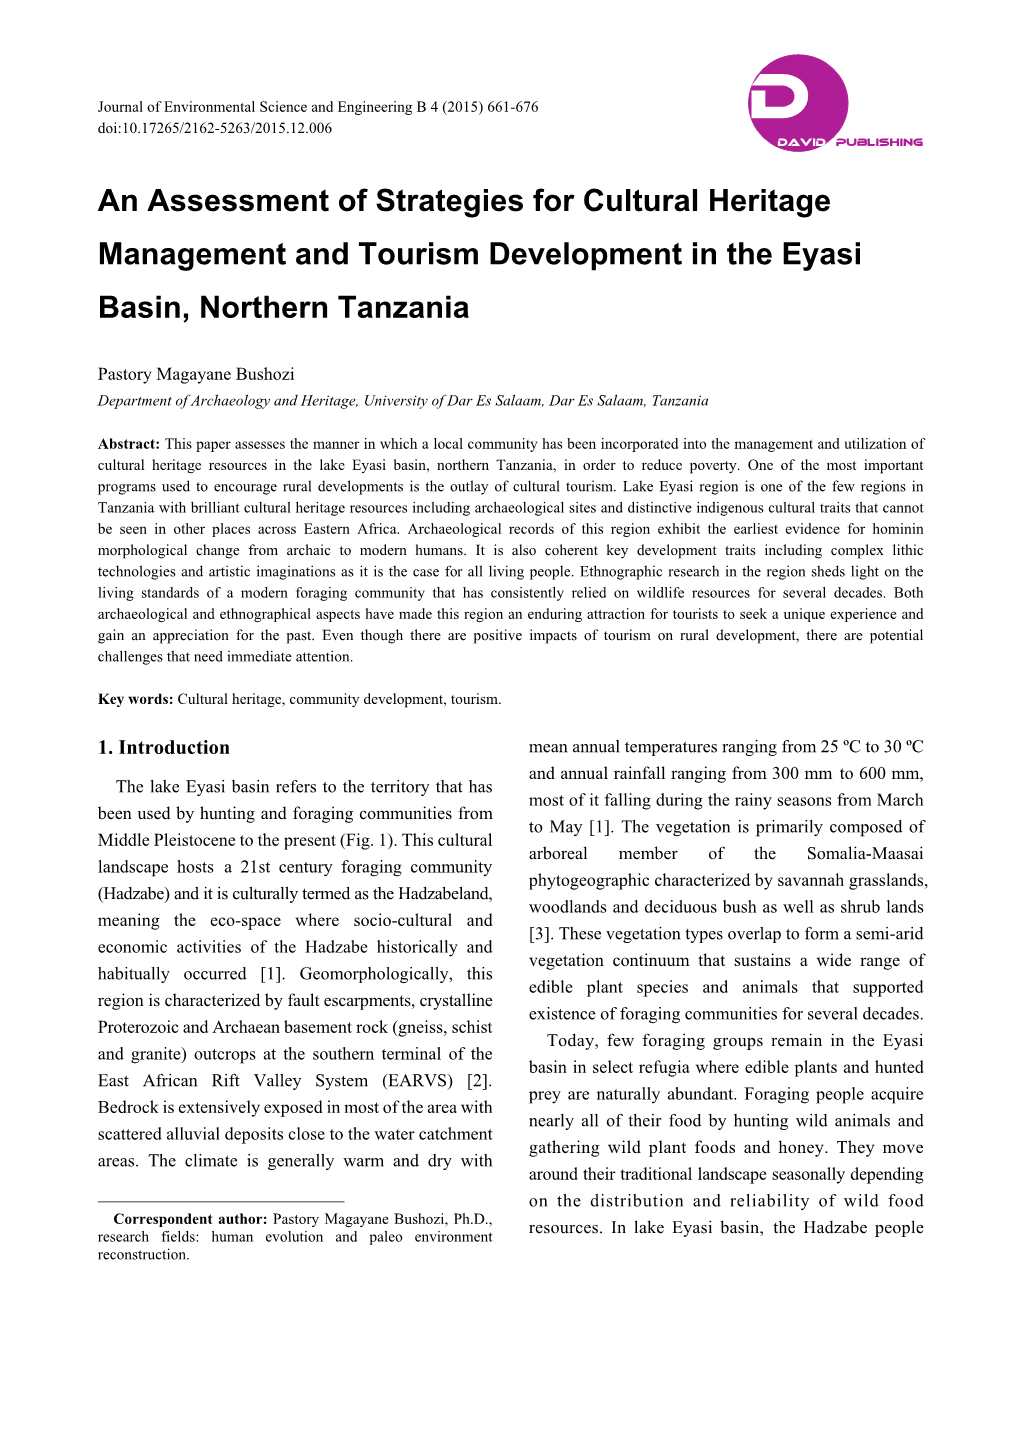 An Assessment of Strategies for Cultural Heritage Management and Tourism Development in the Eyasi Basin, Northern Tanzania